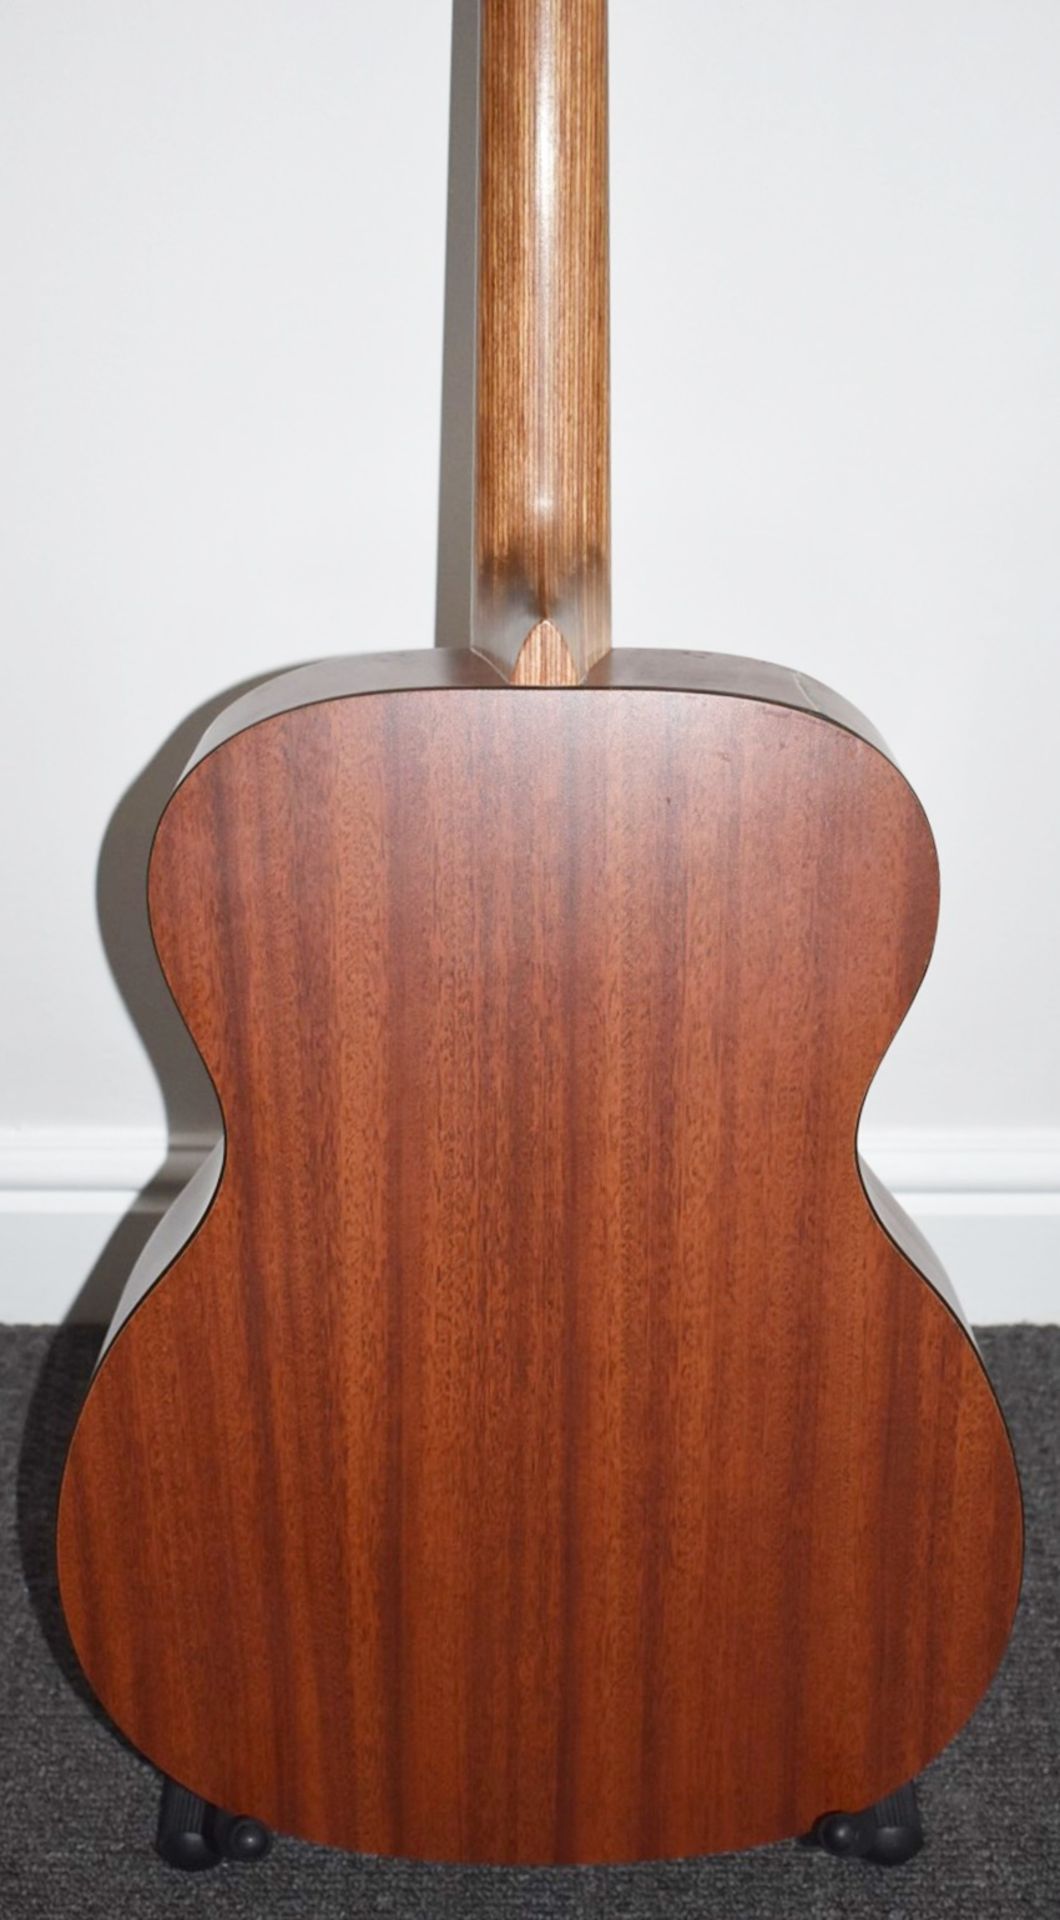 1 x Martin 2003 Auditorium Solid Spruce Top Acoustic Guitar - Model 000X1 - NO VAT ON THE HAMMER! - Image 10 of 10